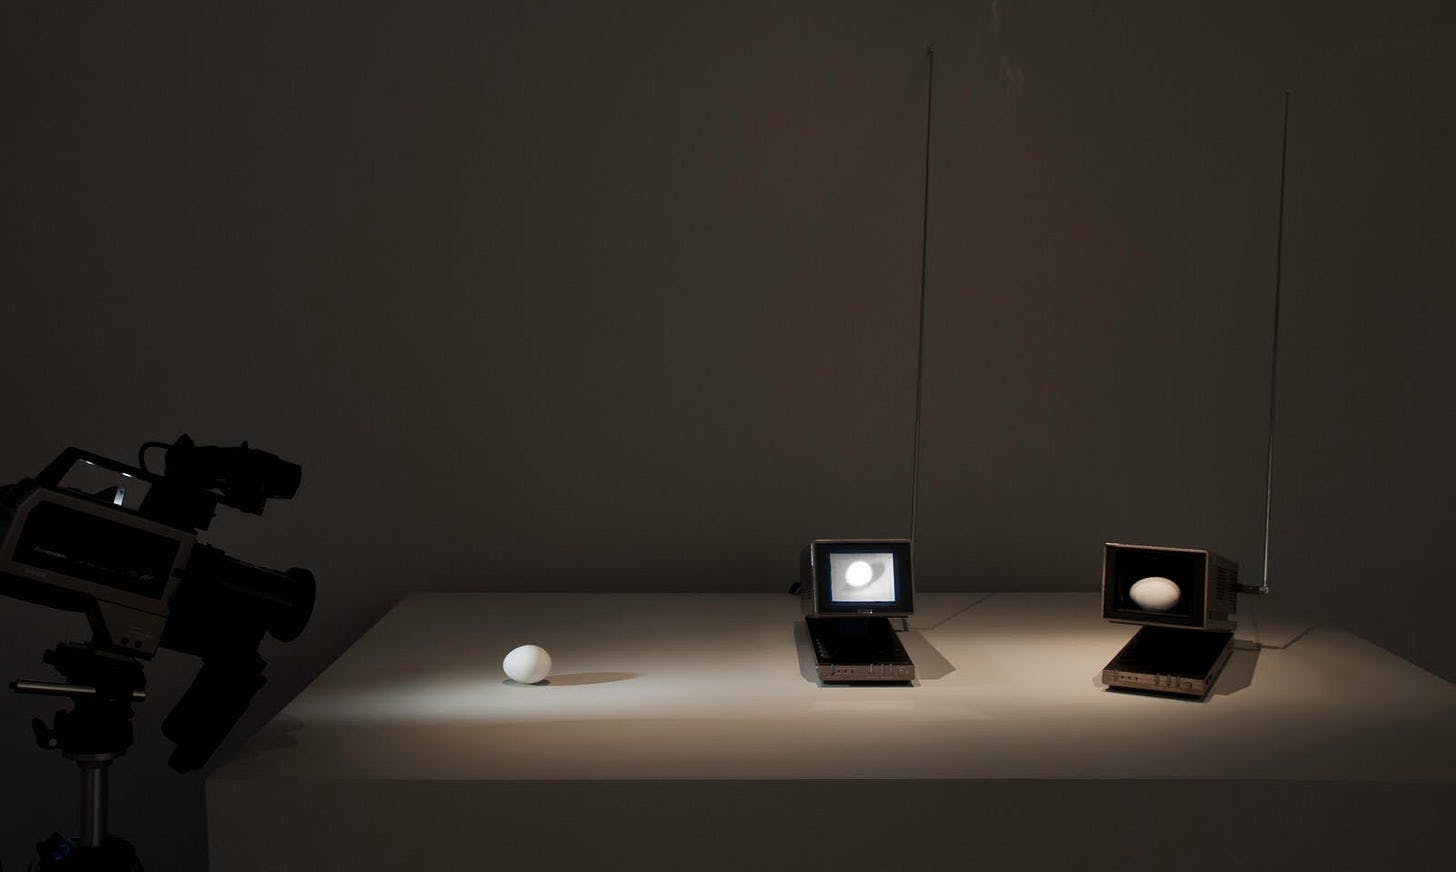 Three Eggs by Nam June Paik, 1975–1982. [An egg on a table is filmed by a camera. Two small monitors beside the egg display its projection.]